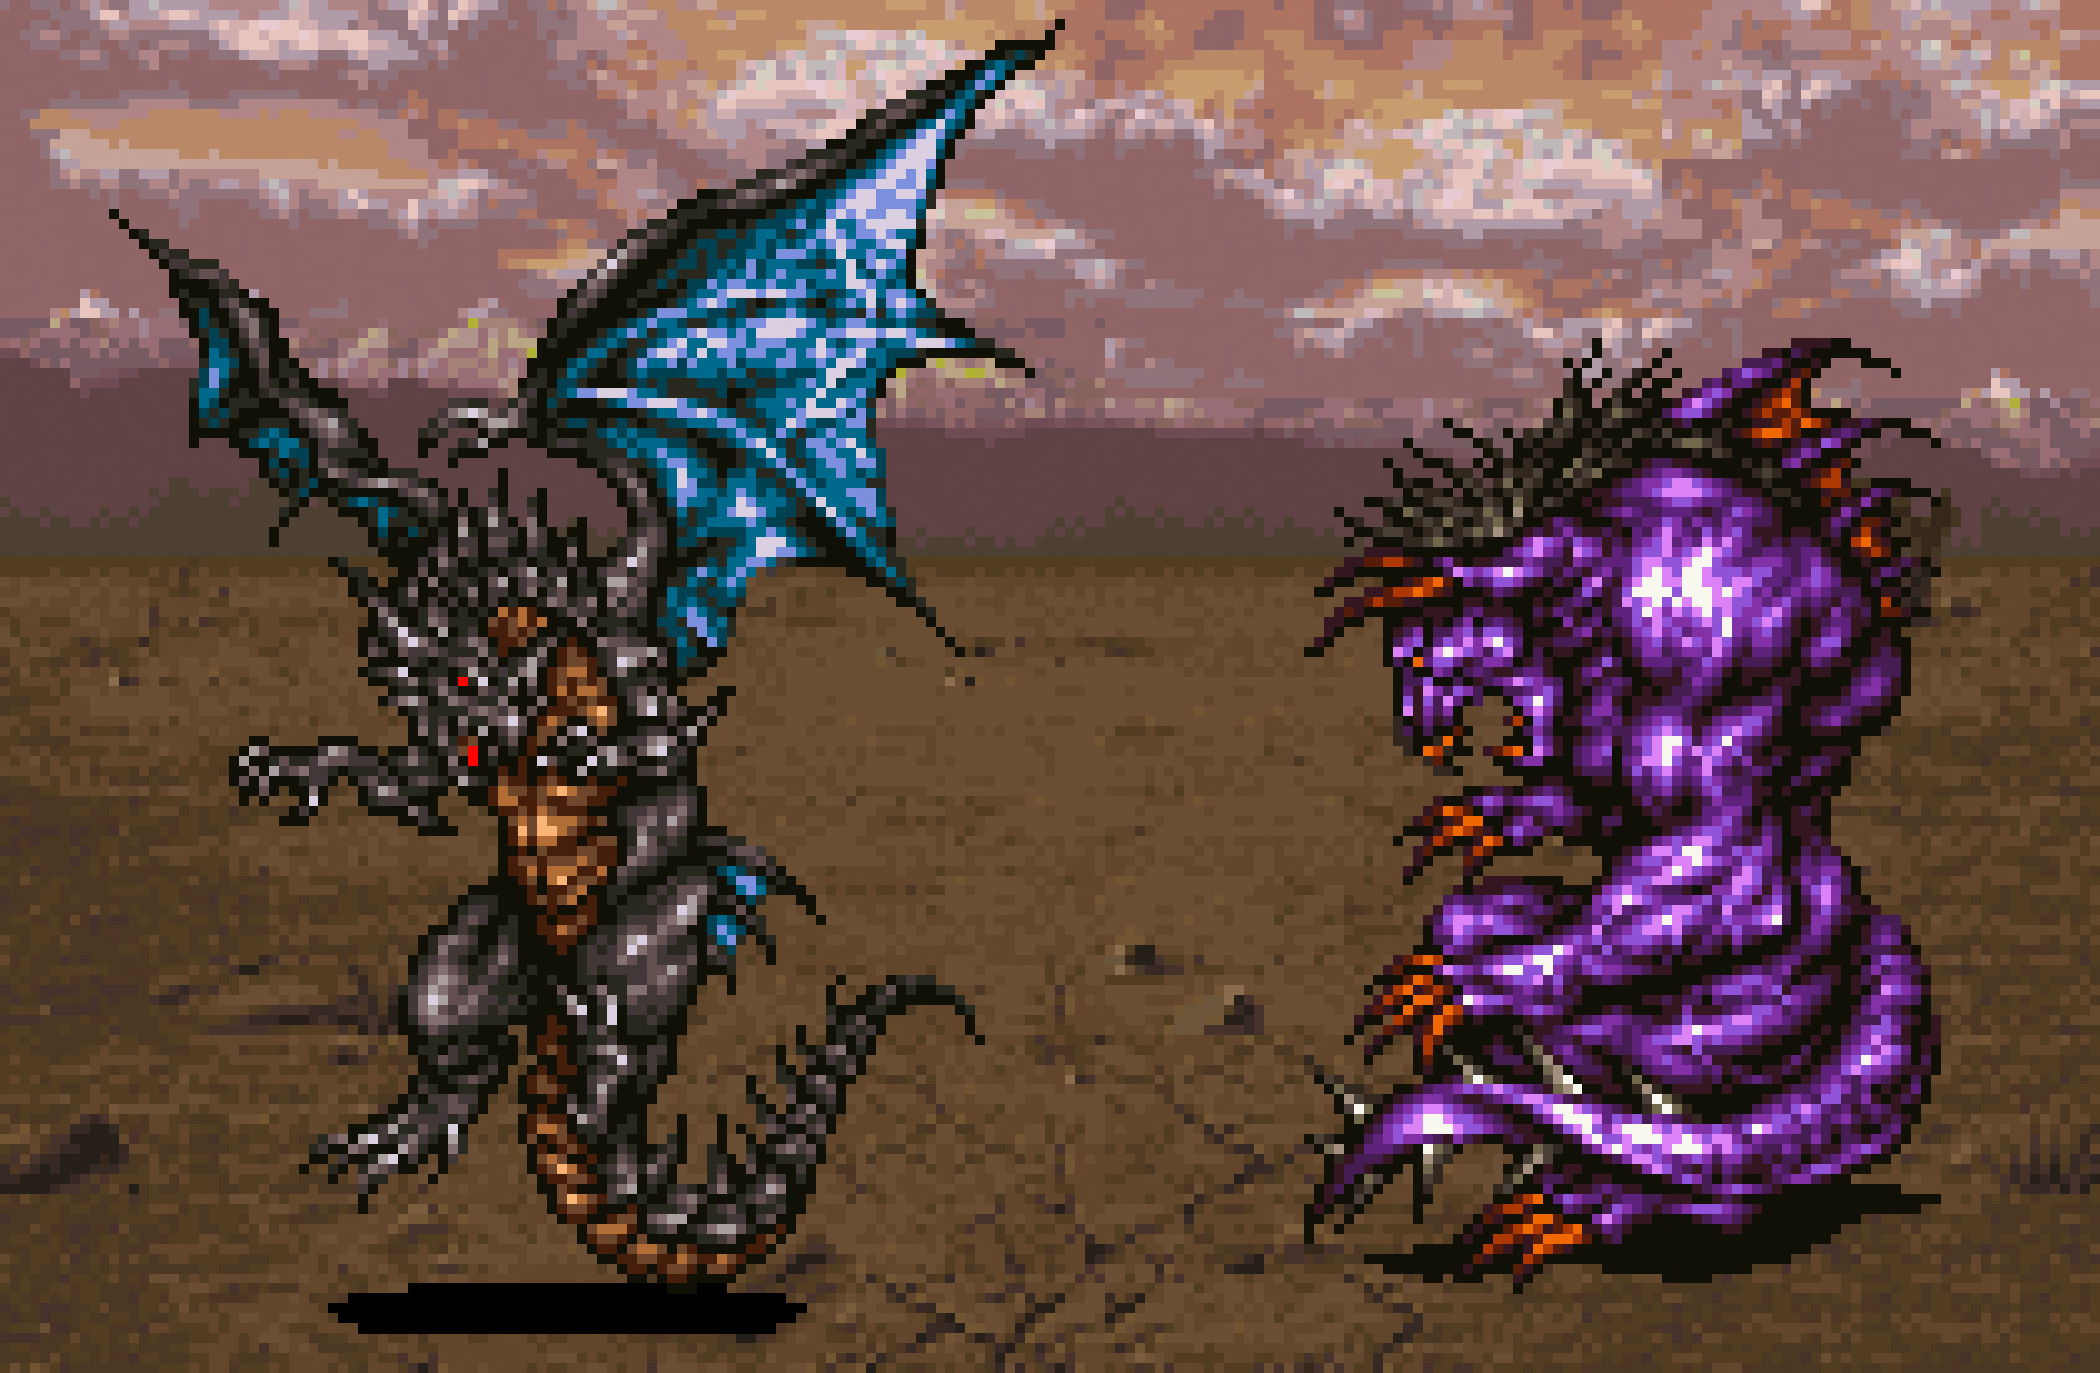 Bahamut and Behemoth: One and the Same? — Thrilling Tales of Old Video Games